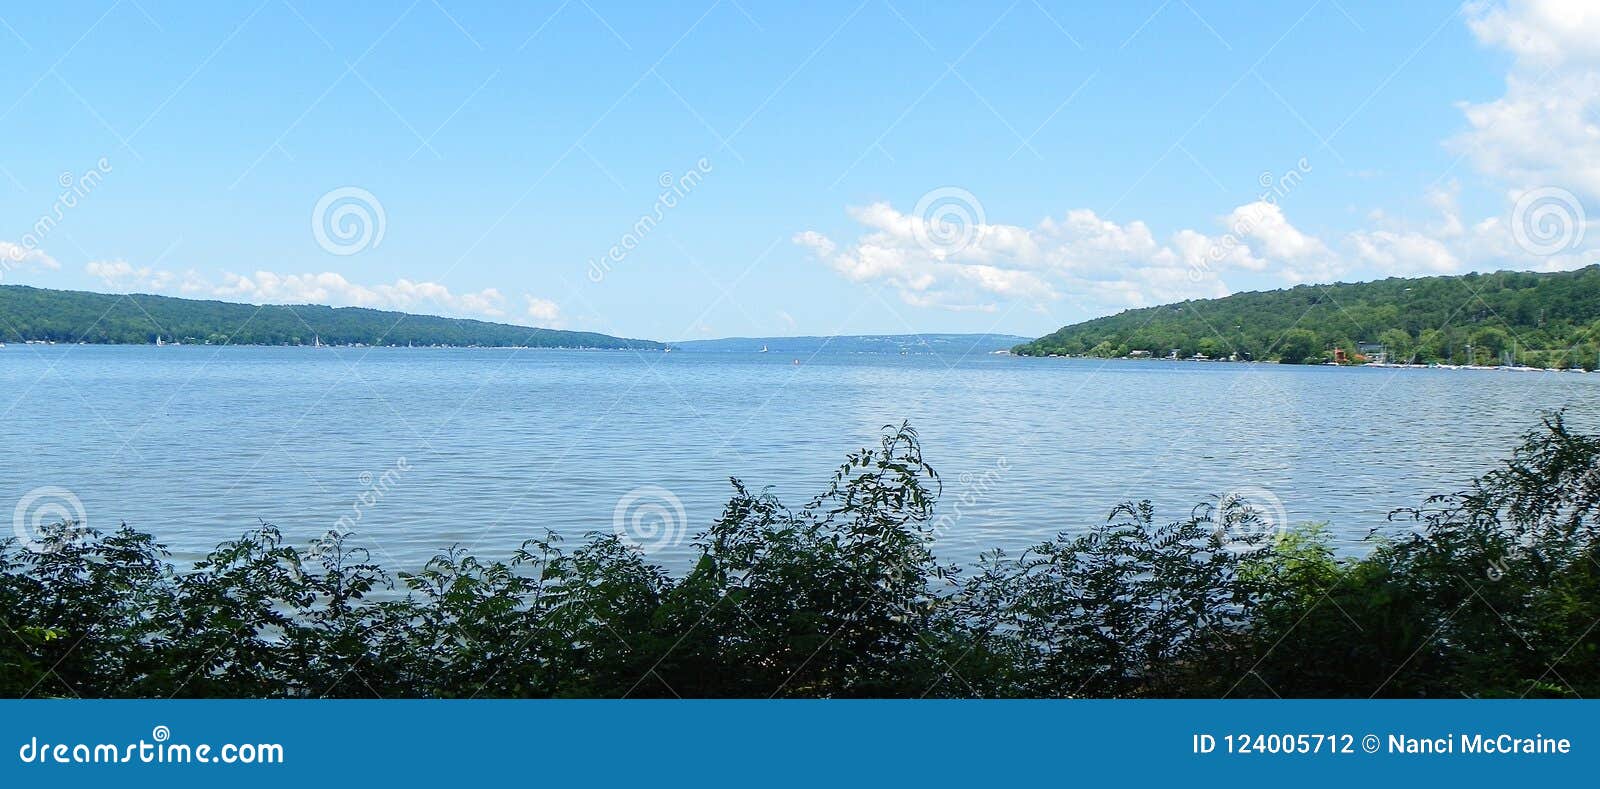 typical banner view of cayuga lake from stewart park